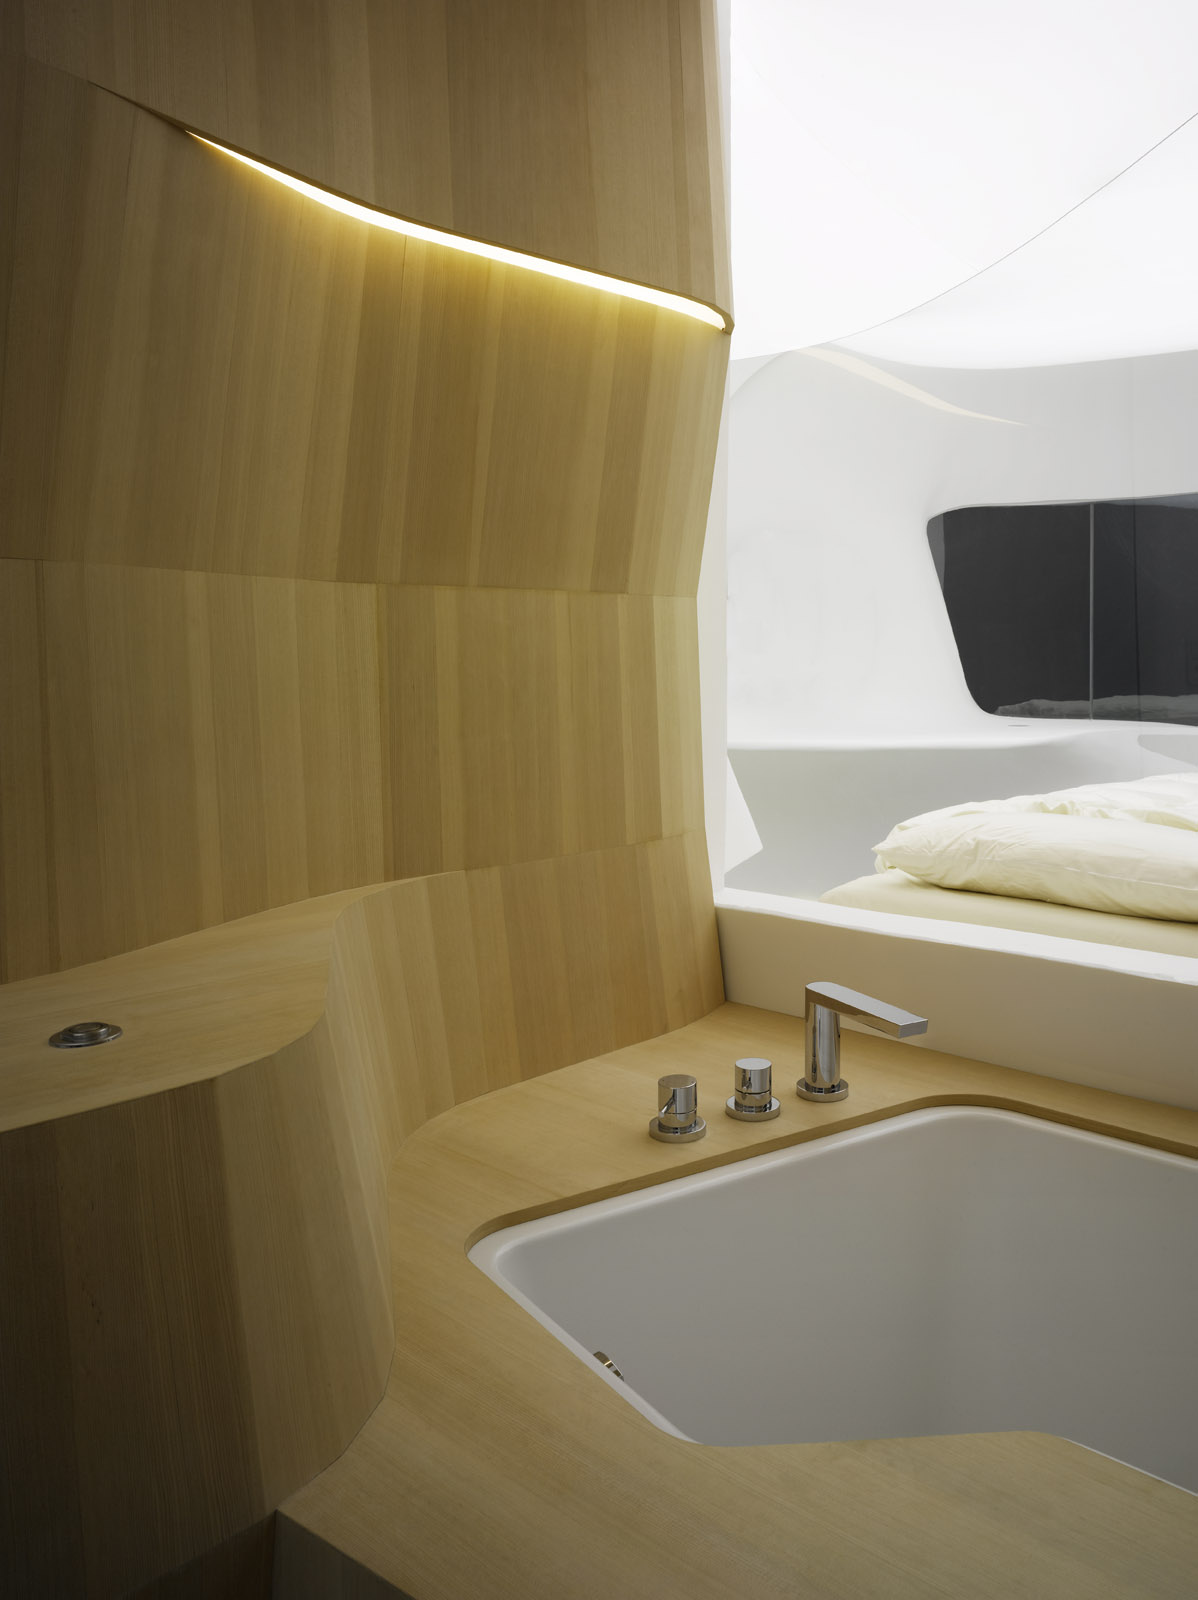 The bathroom as a private wellness oasis, exhibited in the FutureHotel showcase at the Fraunhofer inHaus Center in Duisburg.